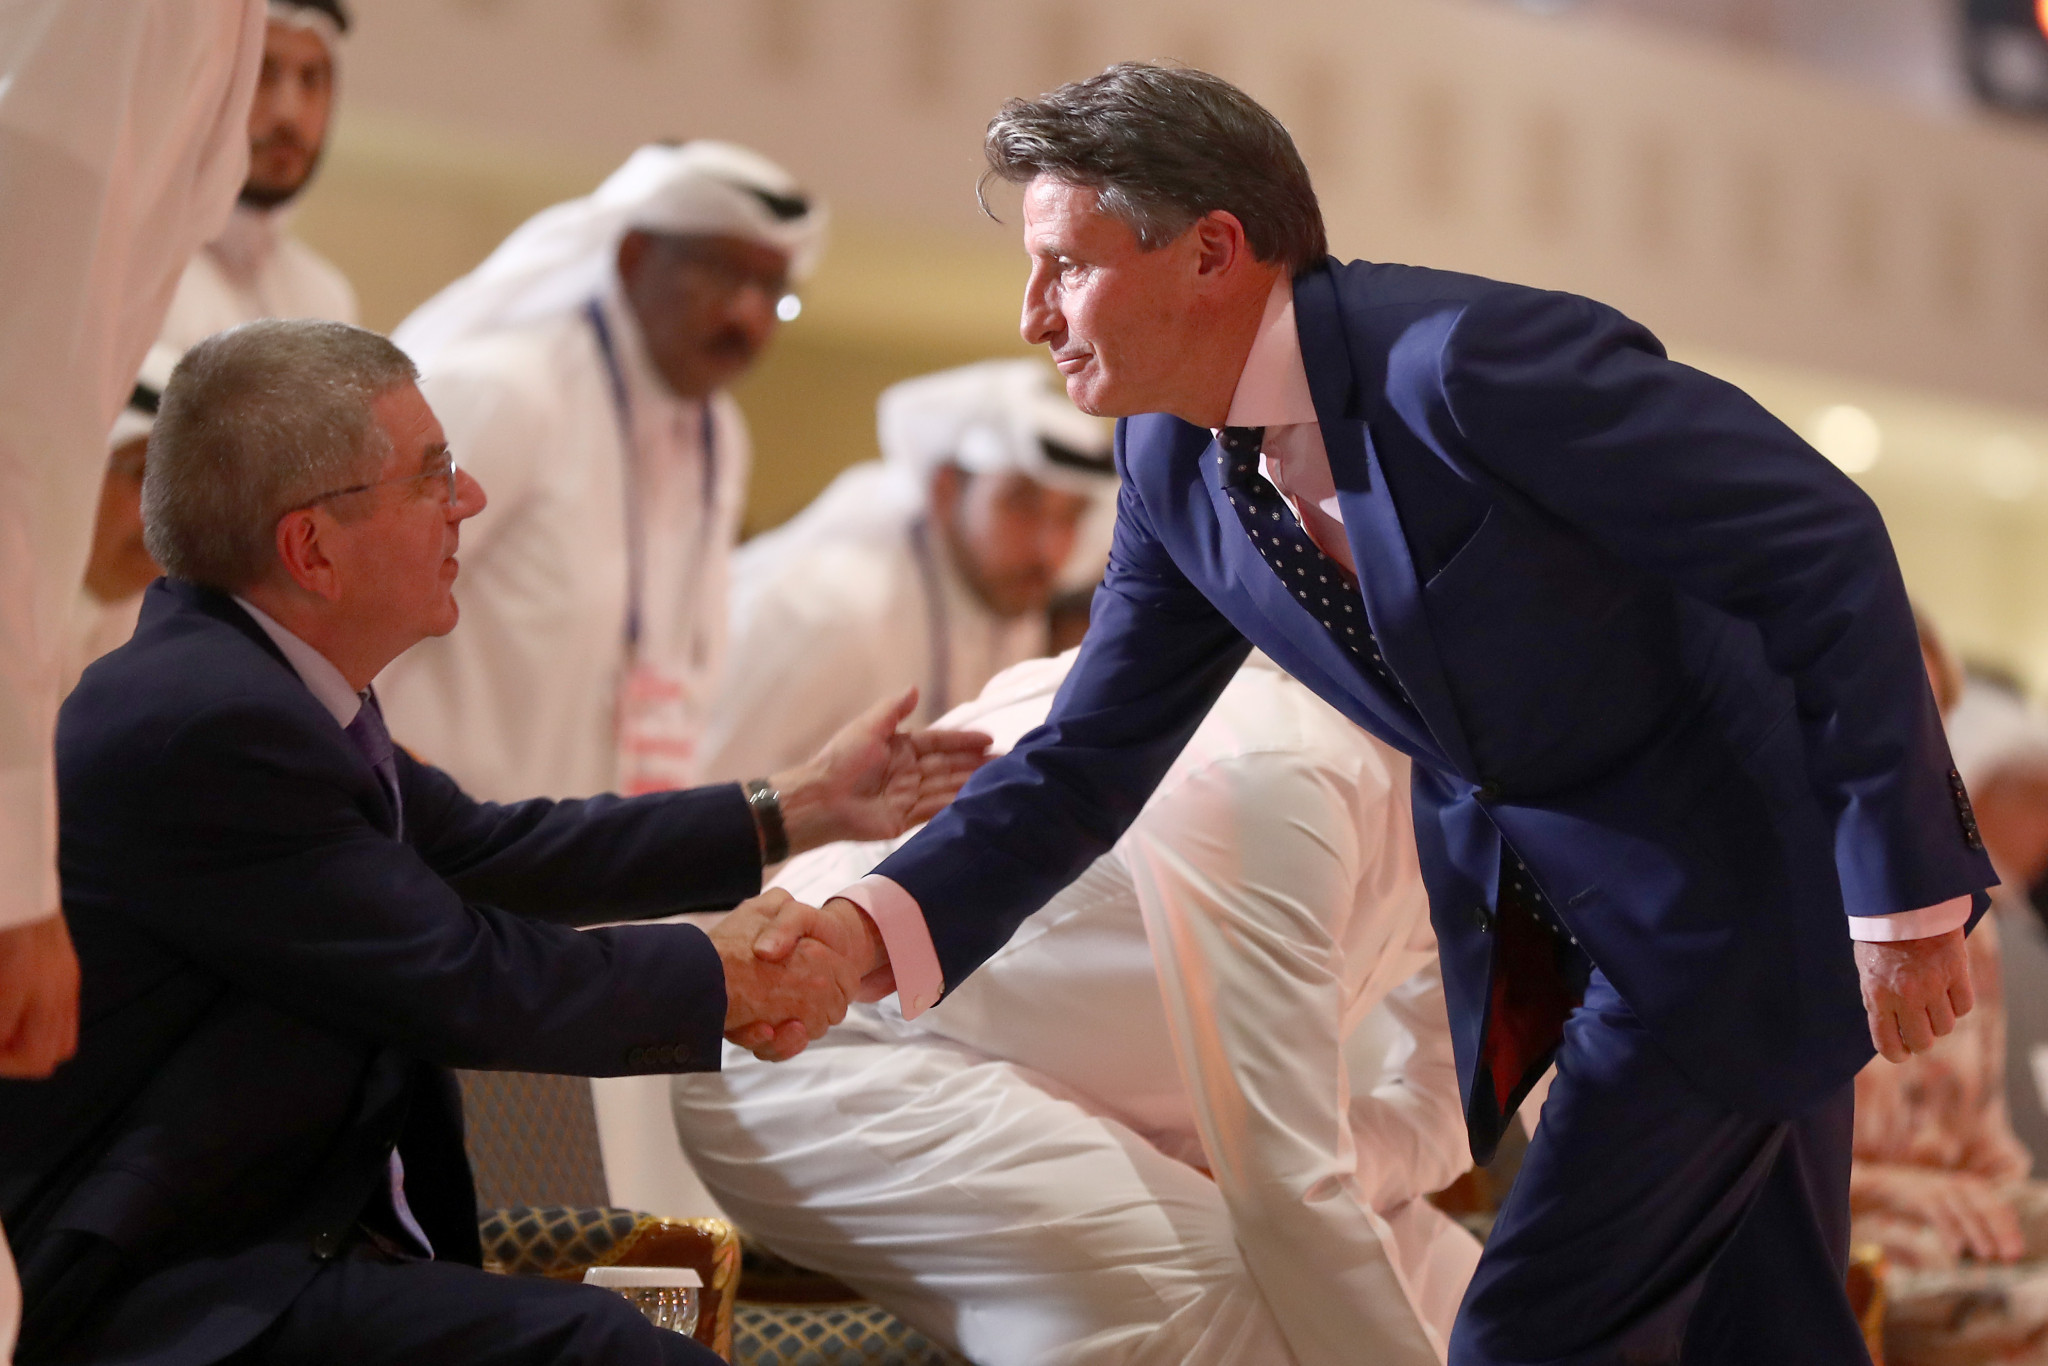 Sebastian Coe, right, would likely only for IOC President if he was confident of winning a vote to succeed Thomas Bach, left, when he is due to step down in 2025 ©Getty Images